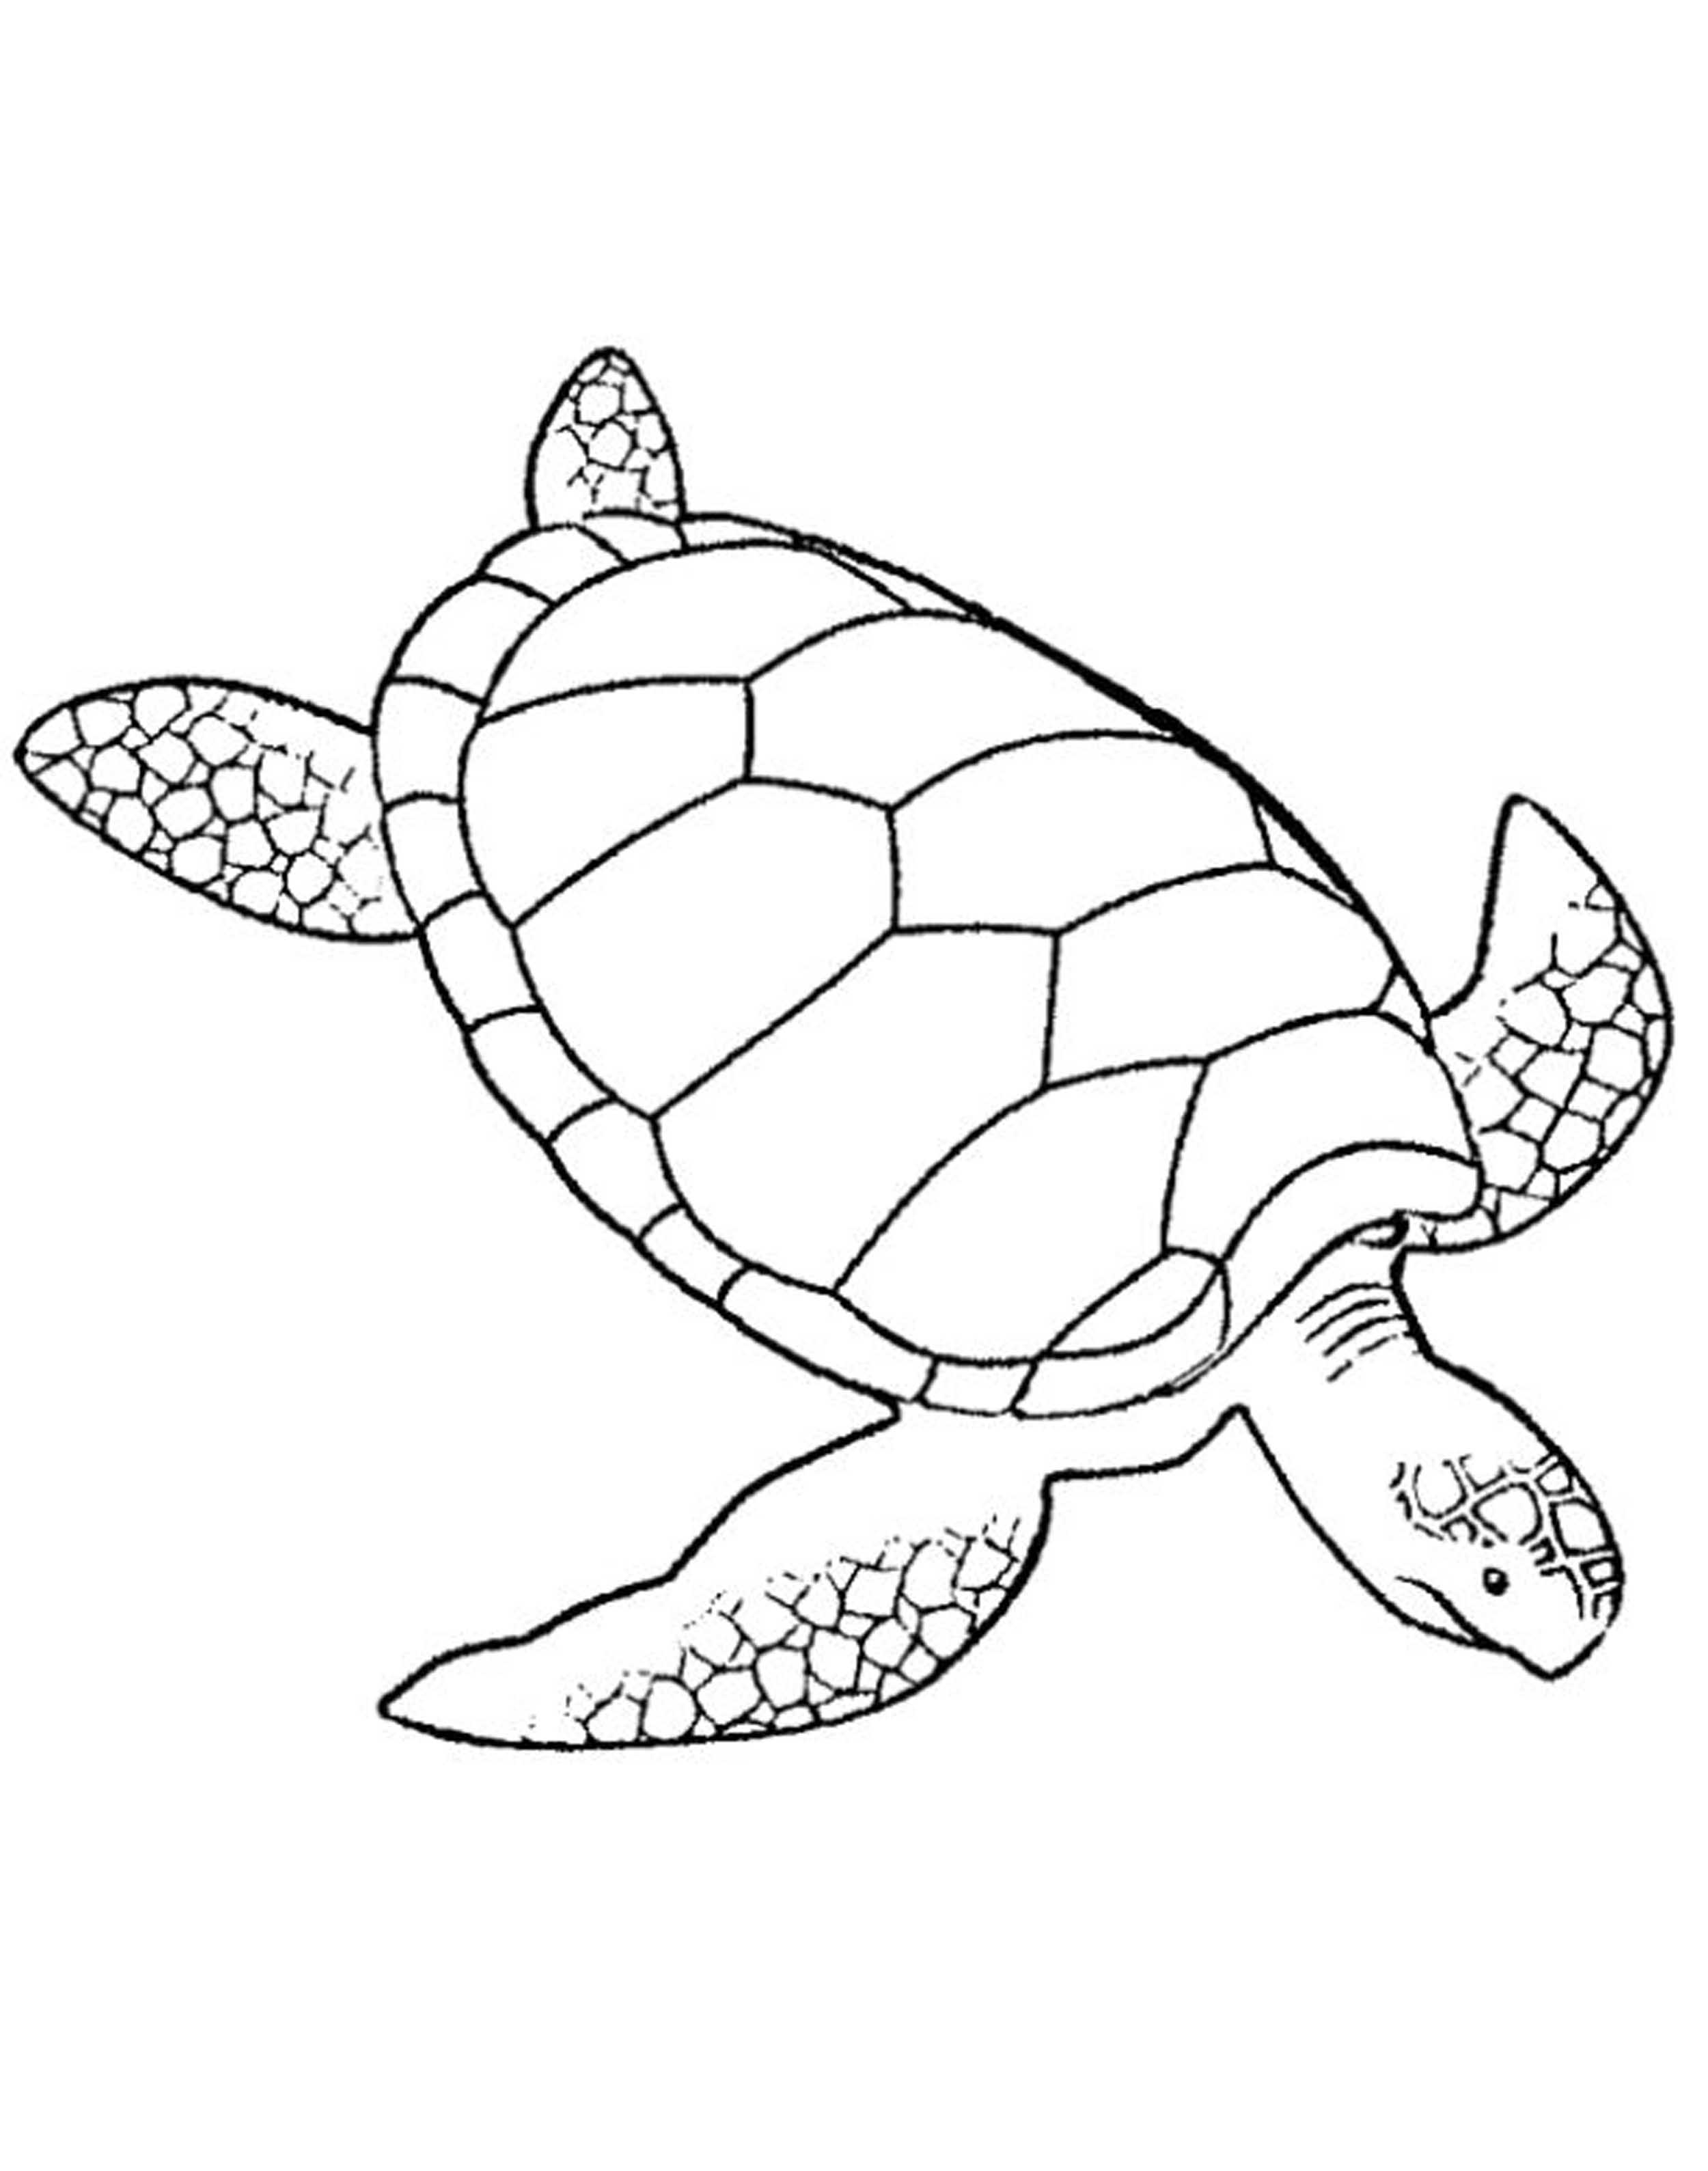 print-download-turtle-coloring-pages-as-the-educational-tool